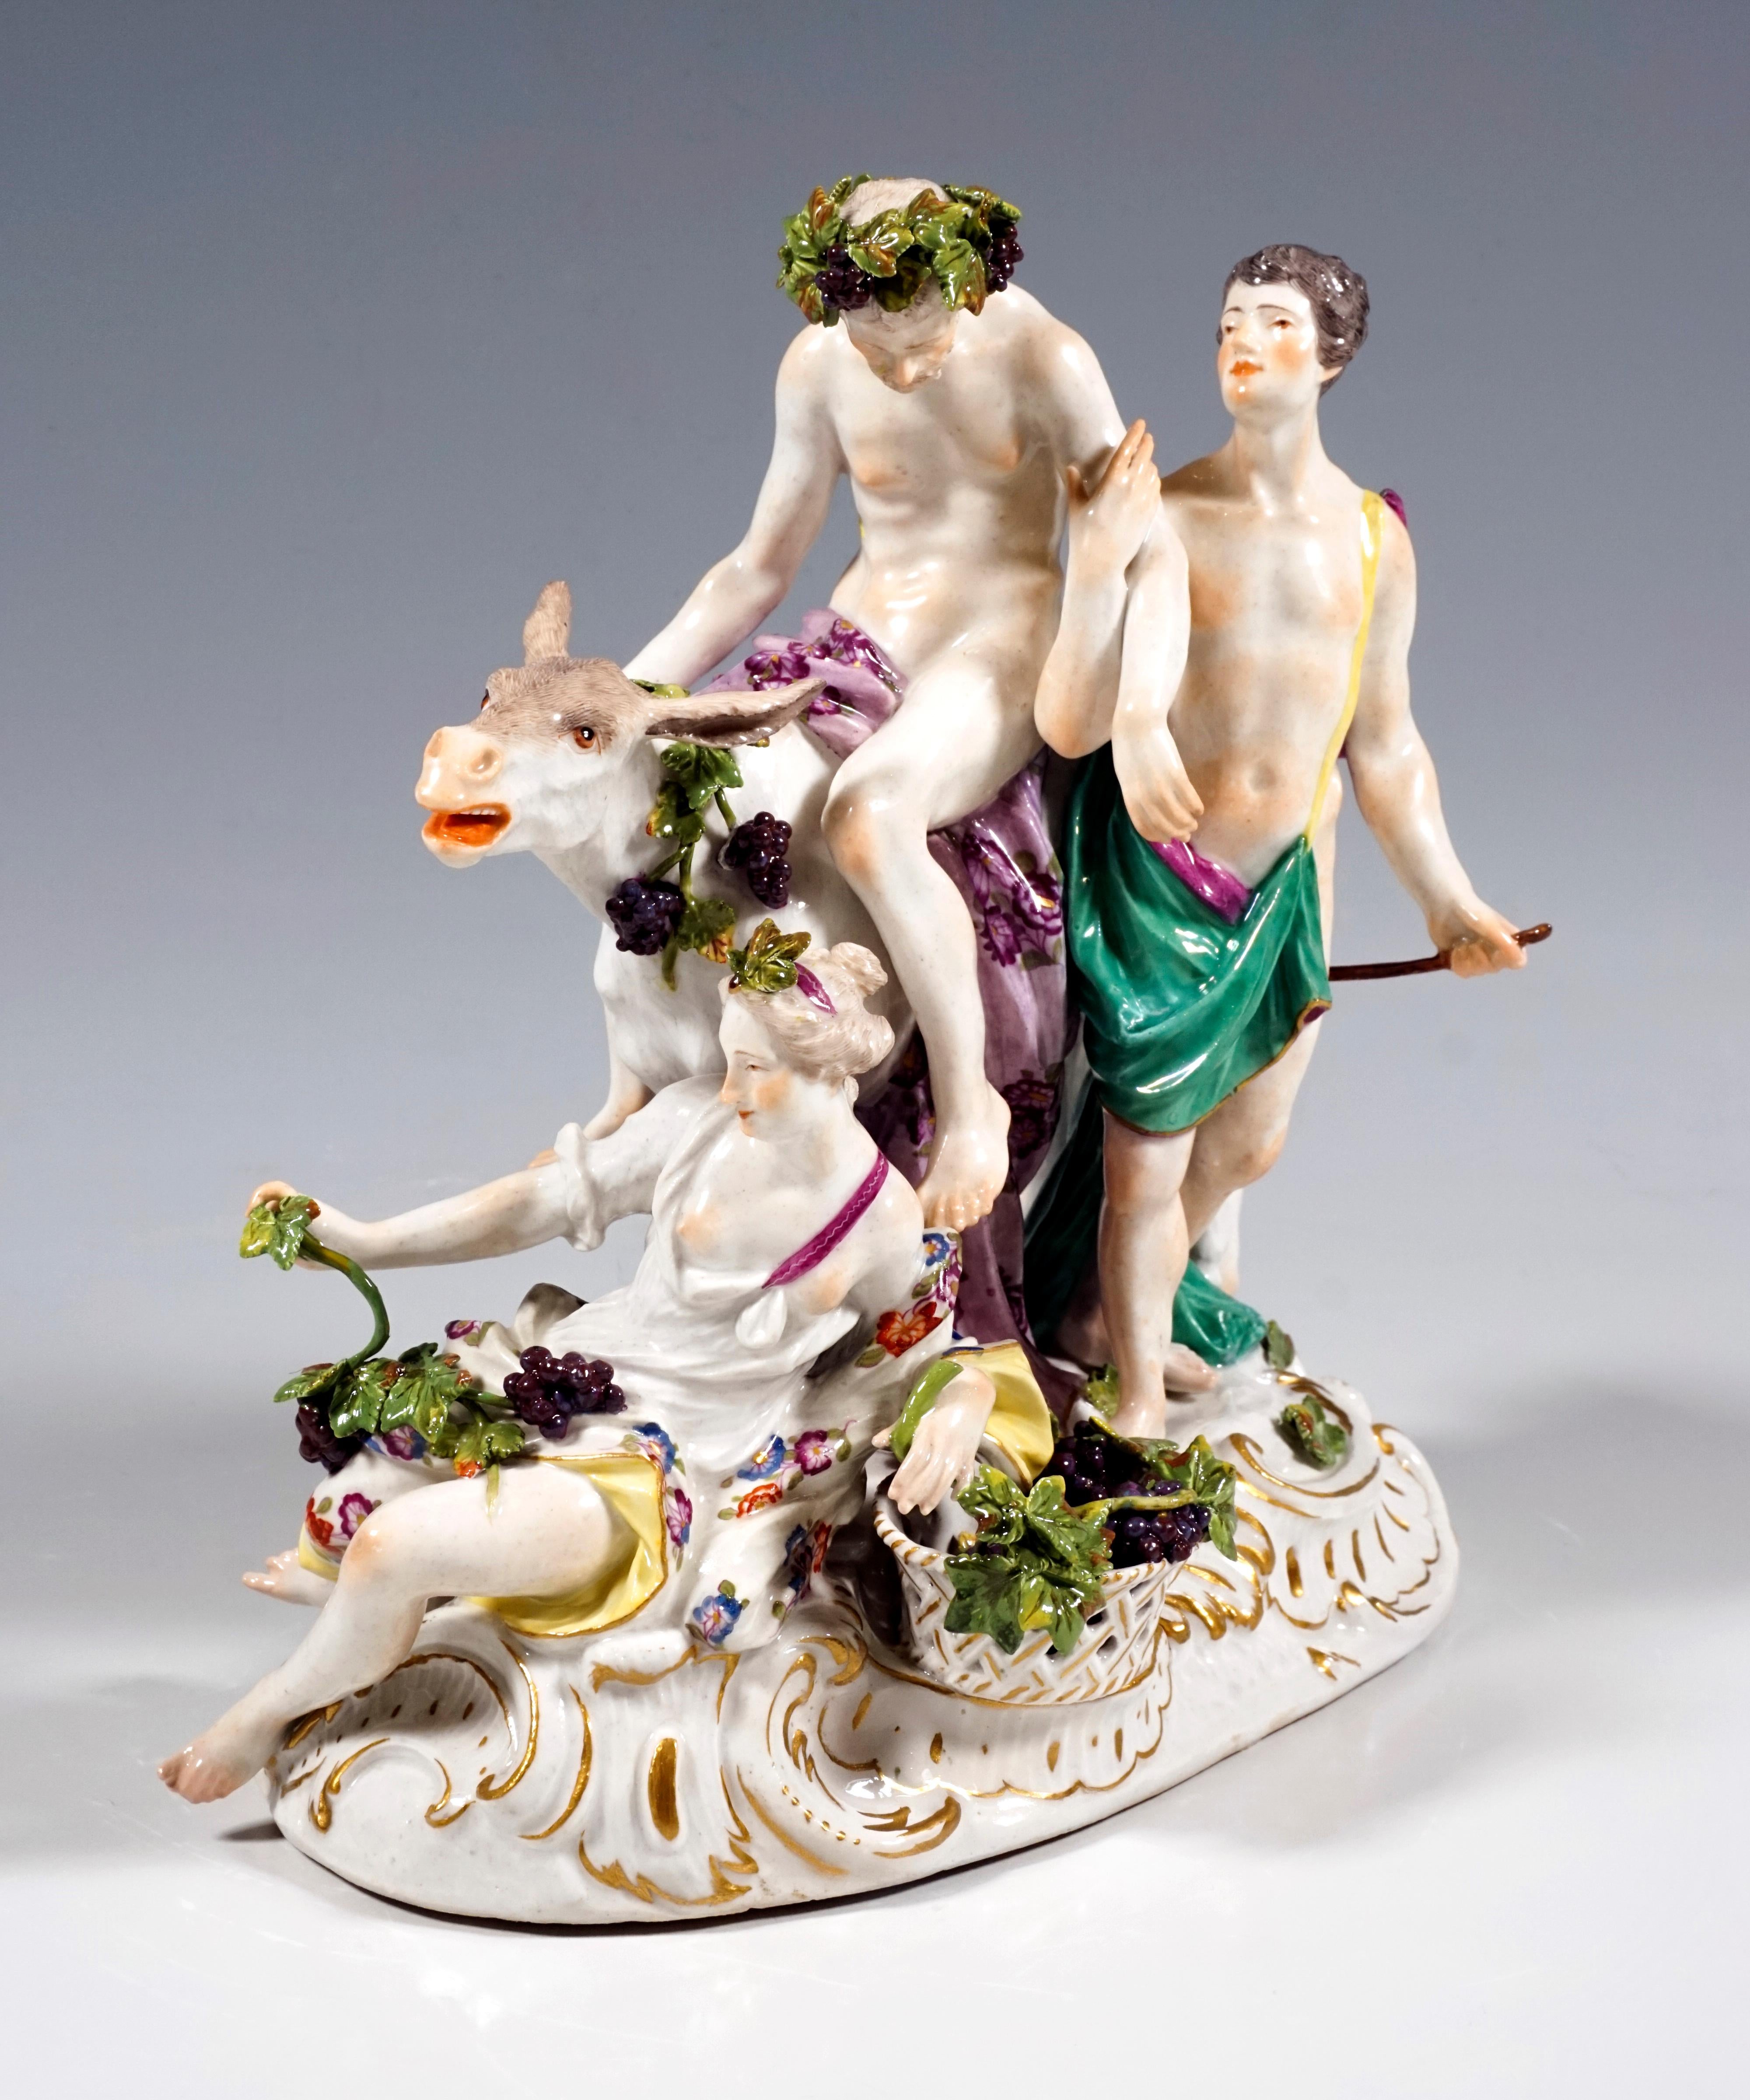 Original Rococo Meissen Group from the 18th century.
The visibly drunk Silenus, crowned with a wreath of grapevines, sits on a donkey and is supported by a young bacchante so that he cannot fall off. A loosely clad nymph lies on the ground in front